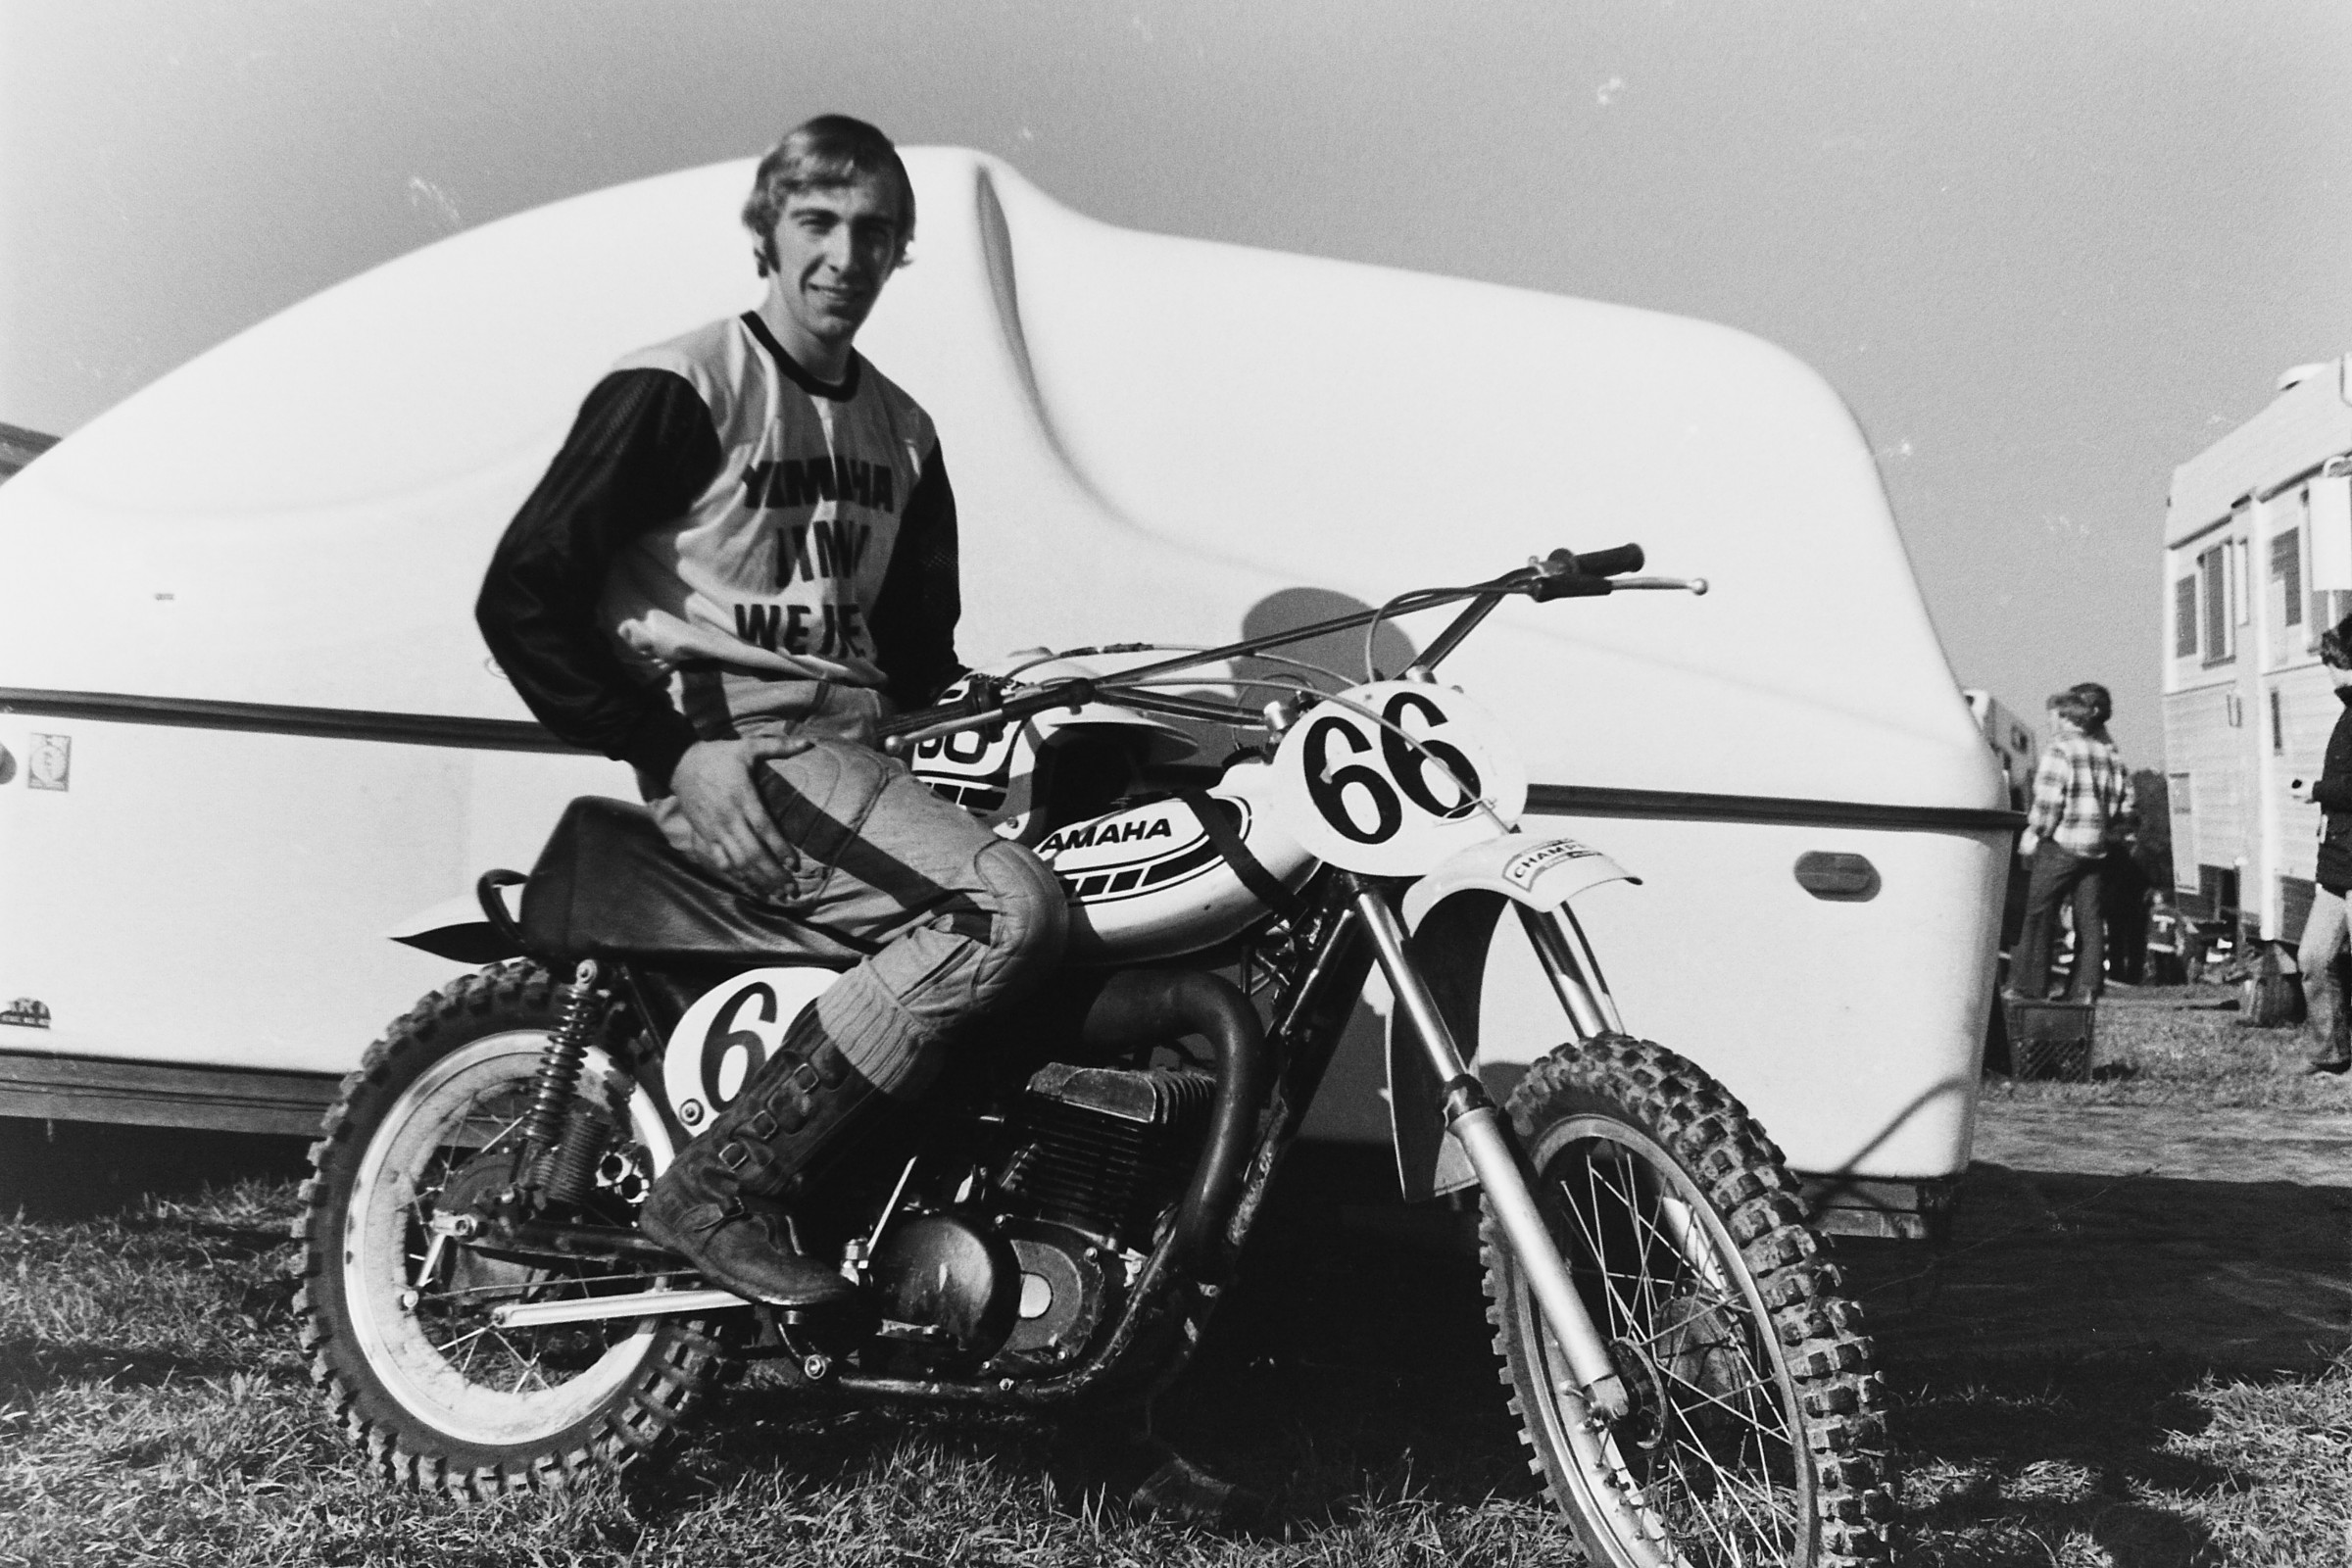 who was the first professional motocross racer